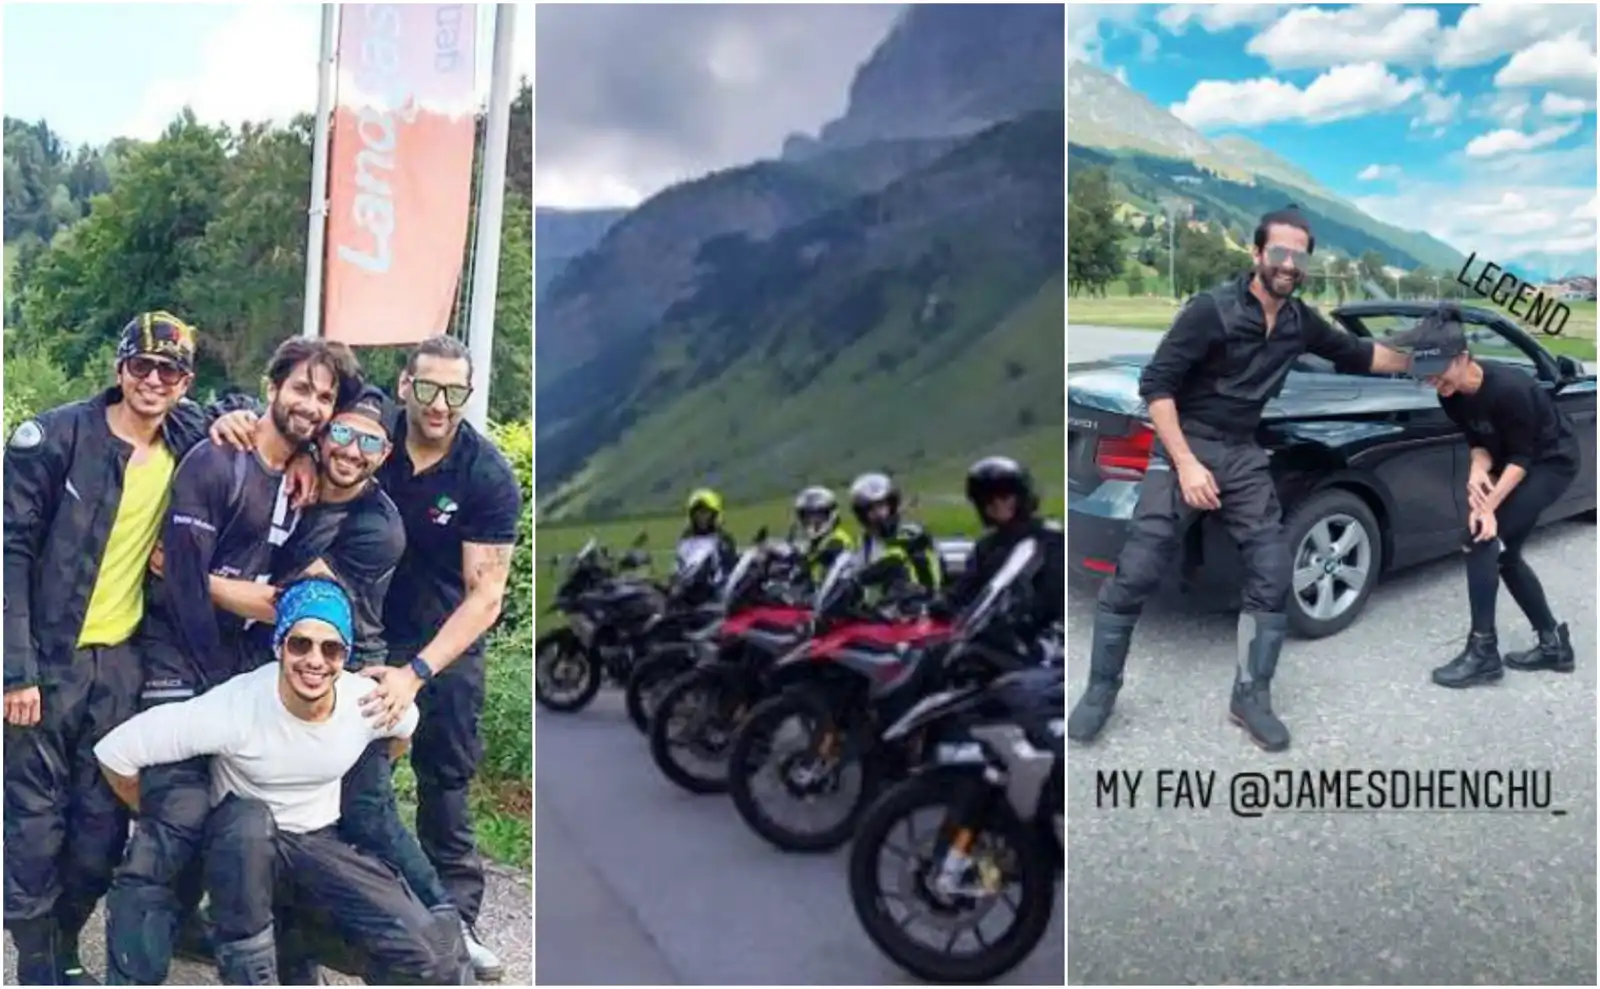 Shahid Kapoor’s Euro Bike Trip With Ishaan Khatter, Kunal Kemmu And Other Friends Feel Straight Out Of A Zoya Akhtar Film